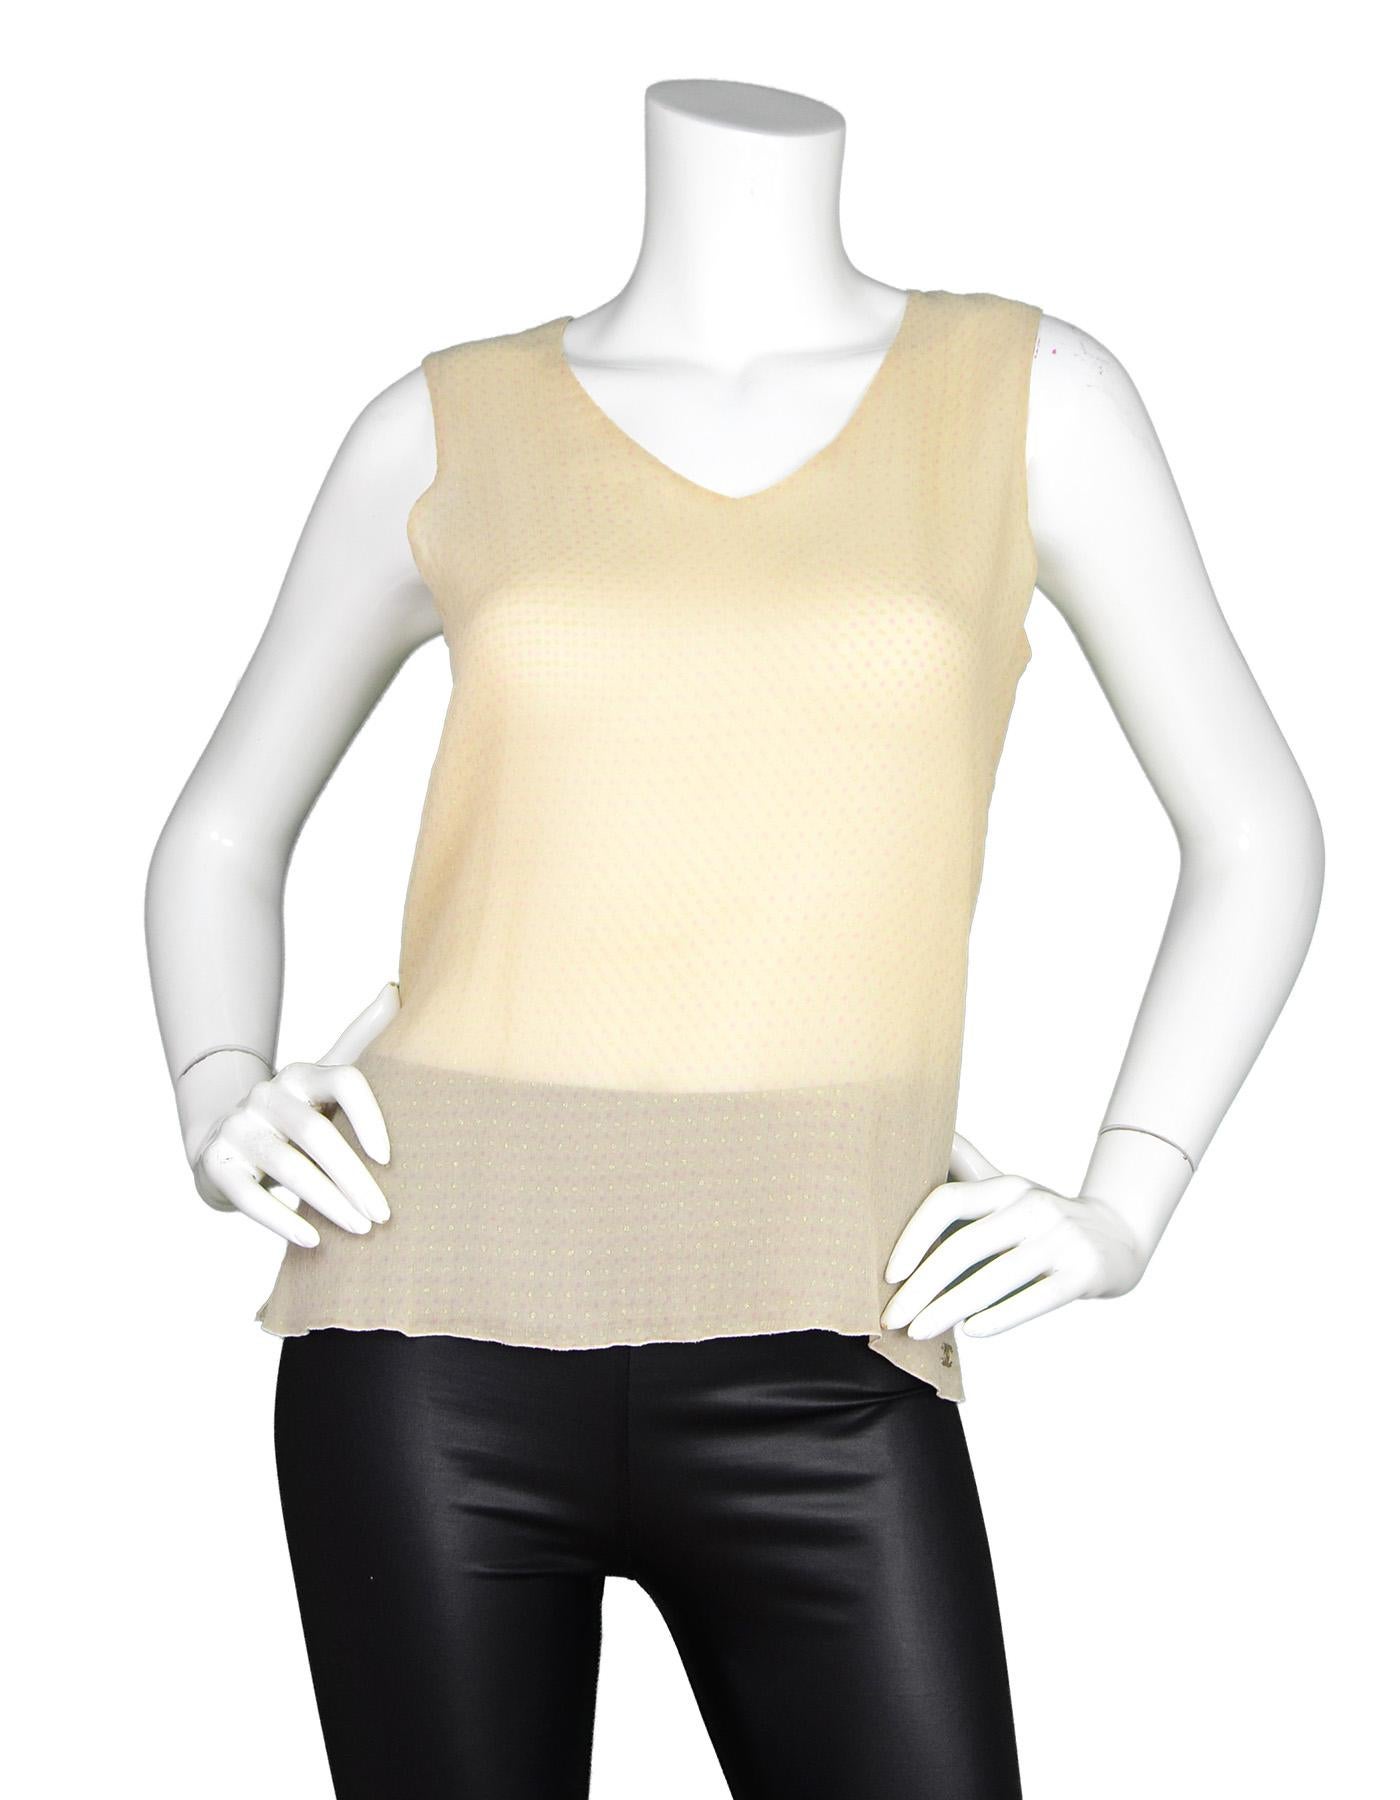 Chanel Beige Sheer Silk Sleeveless Tank Top W/ Pink/Gold Metallic Dots & Light Goldtone Metal CC Logo at Bottom Sz S 

Color: Beige
Materials: No composition tag, sheer silk material 
Lining: Unlined
Opening/Closure: Hook-eye back closure 
Overall